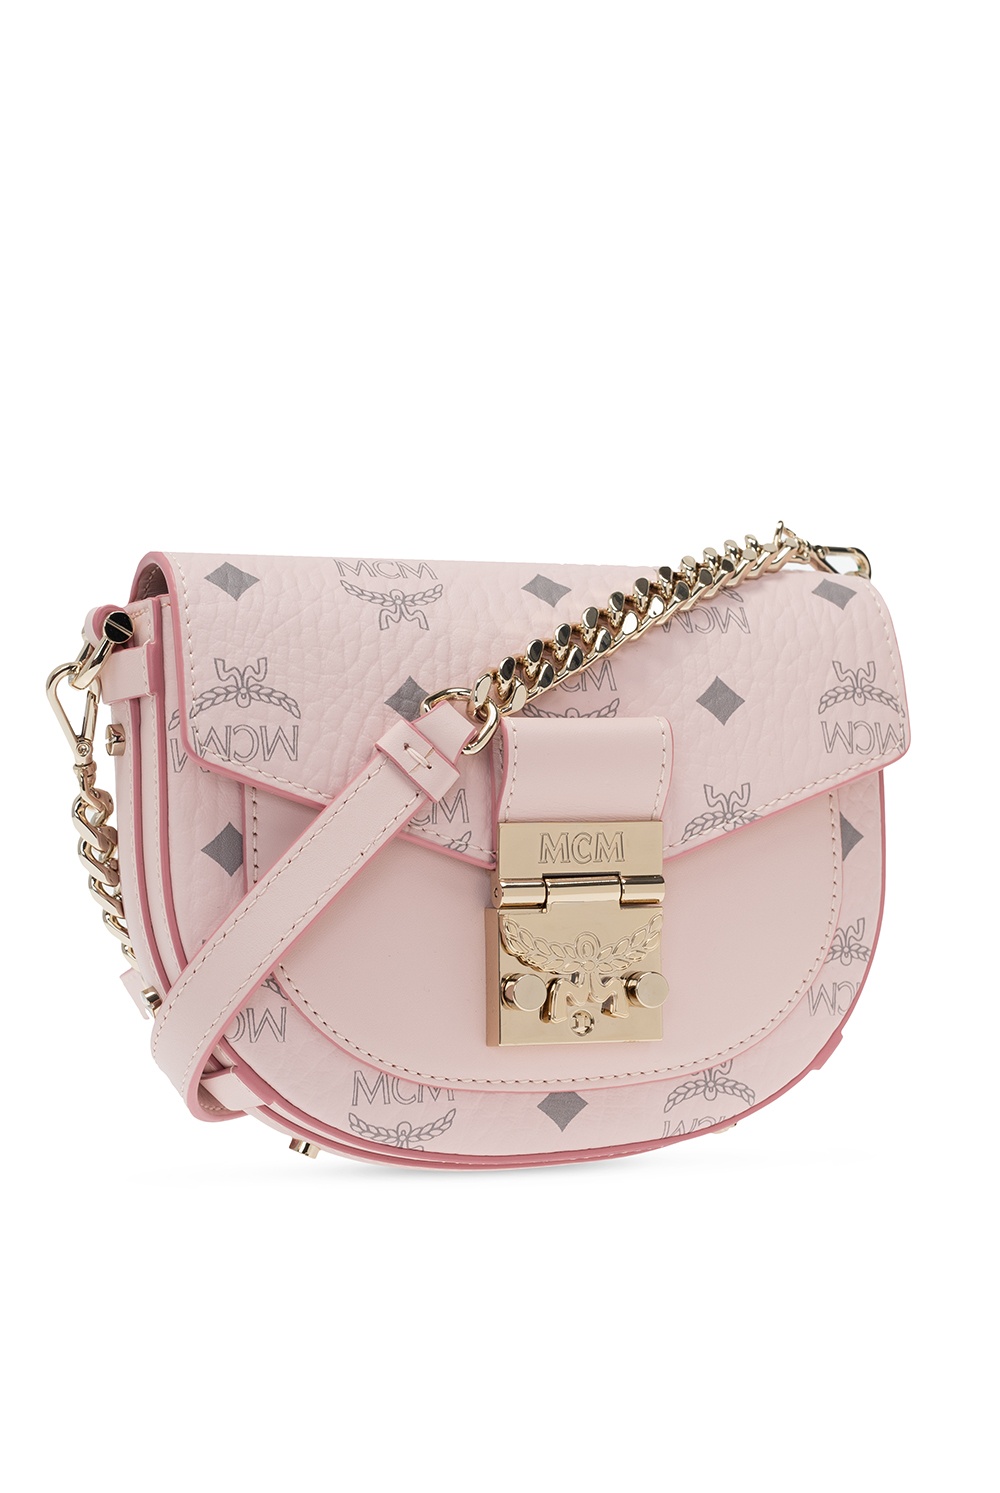 MCM Patricia Crossbody Wallet Visetos Large Soft Pink in Coated Canvas with  14k Gold - US